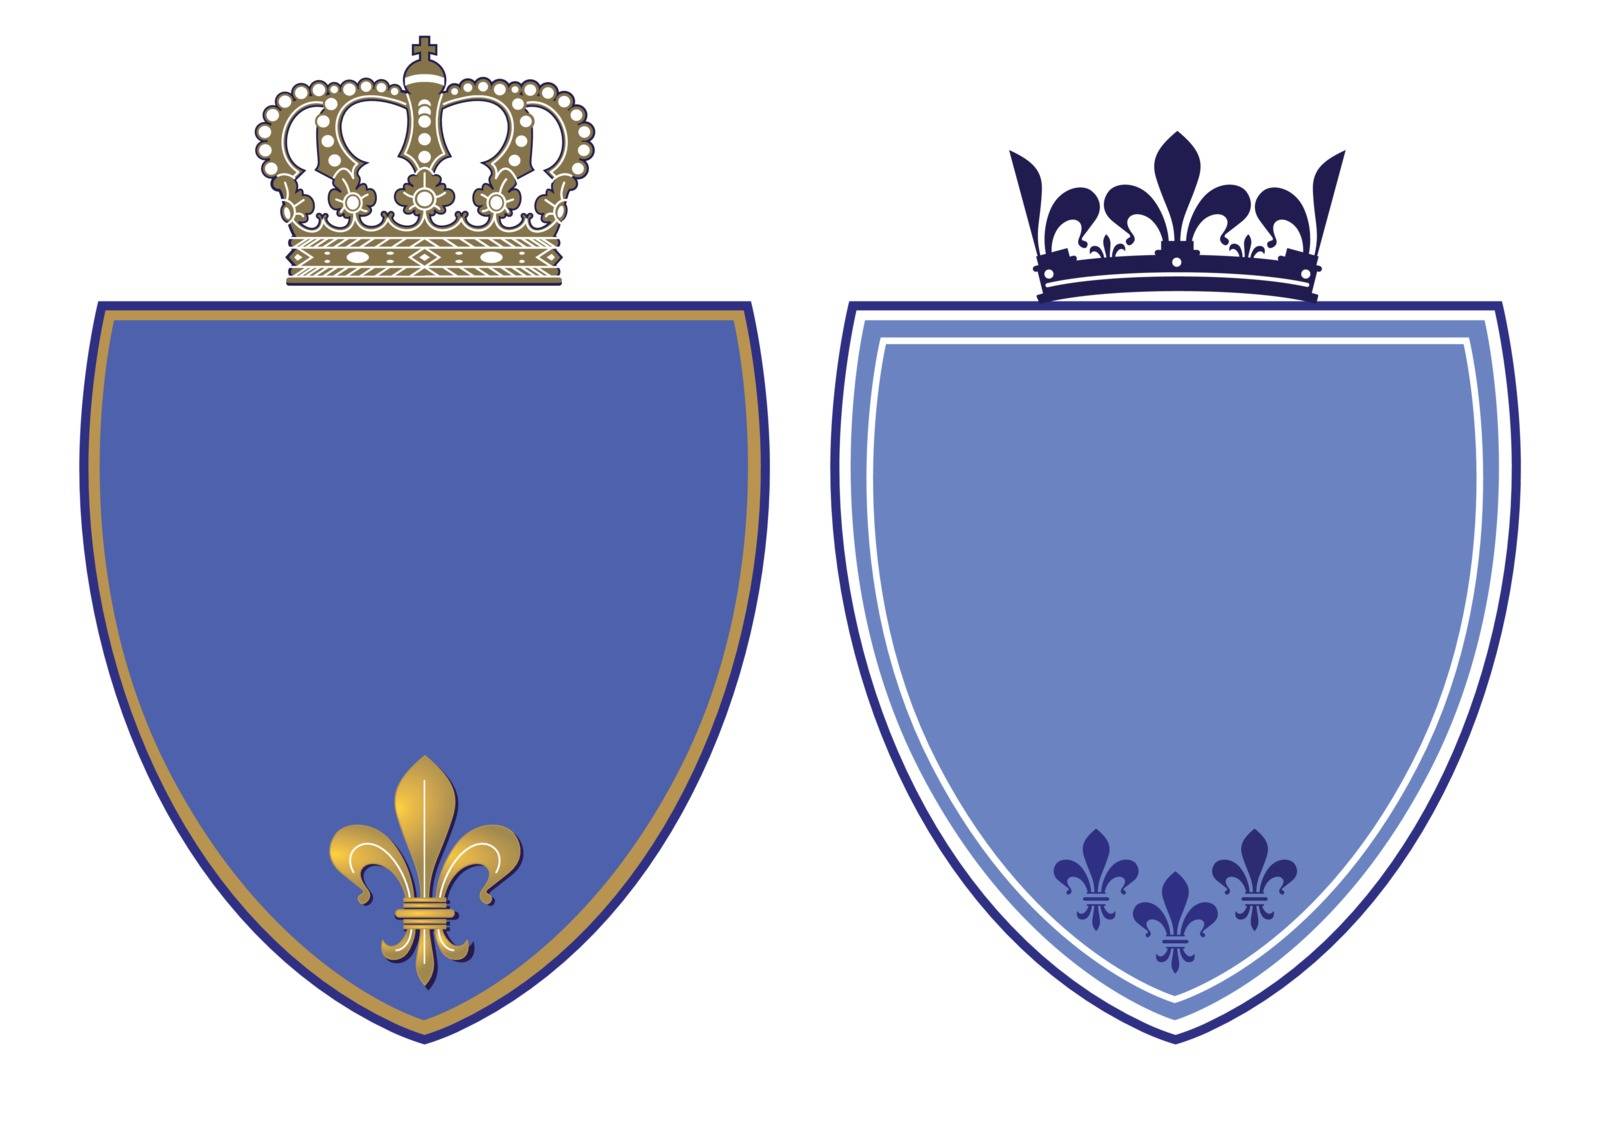 Traditional coat of arms with crown